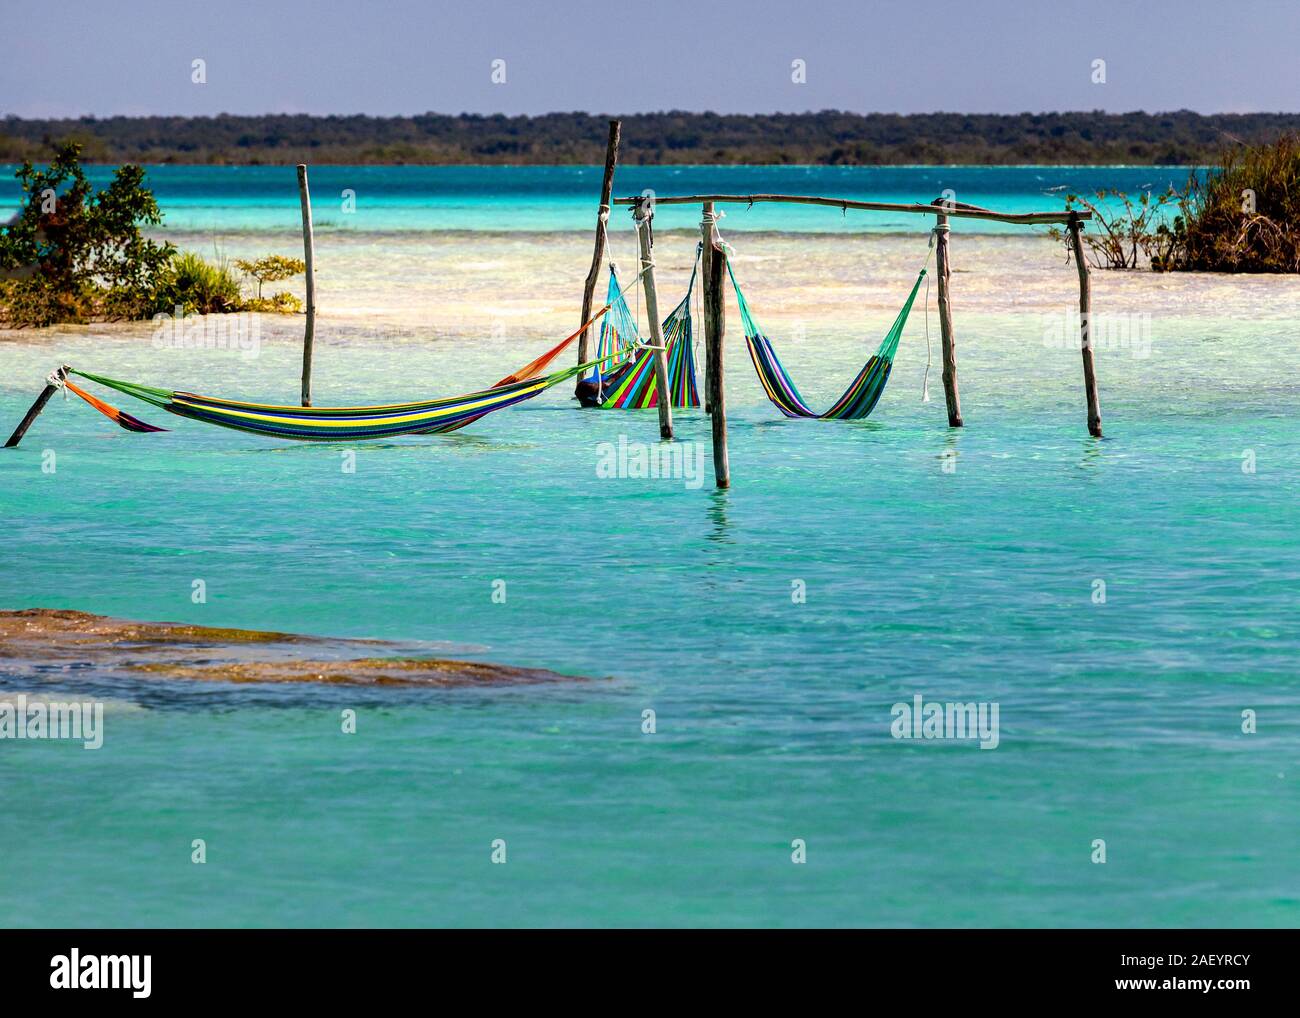 Hammocks hang over the pristine, azure water on Bacalar Lake near the Cocalitos formations, Quintana Roo, Mexico. Stock Photo